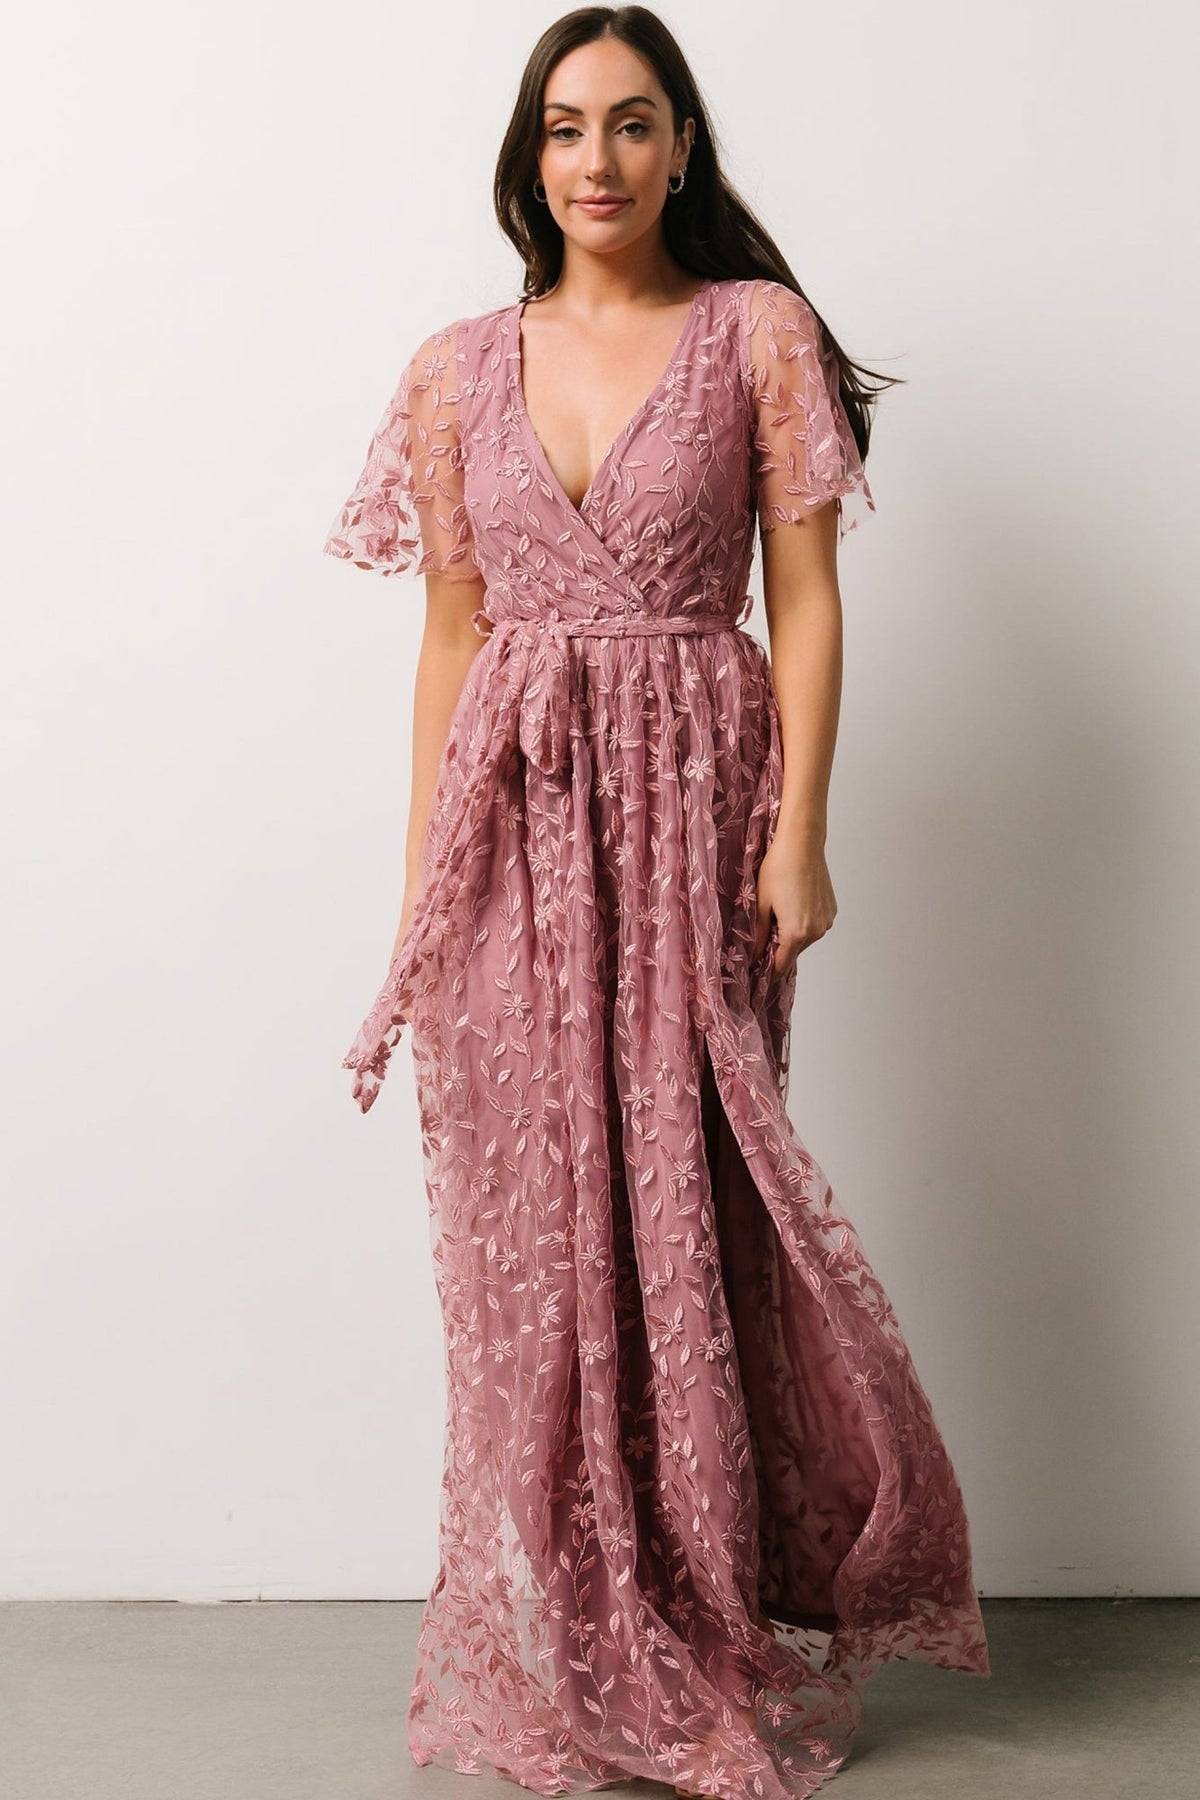 Lulus | Stolen Moments Dusty Pink Lace-Up Lace Maxi Dress | Size Large | 100% Polyester